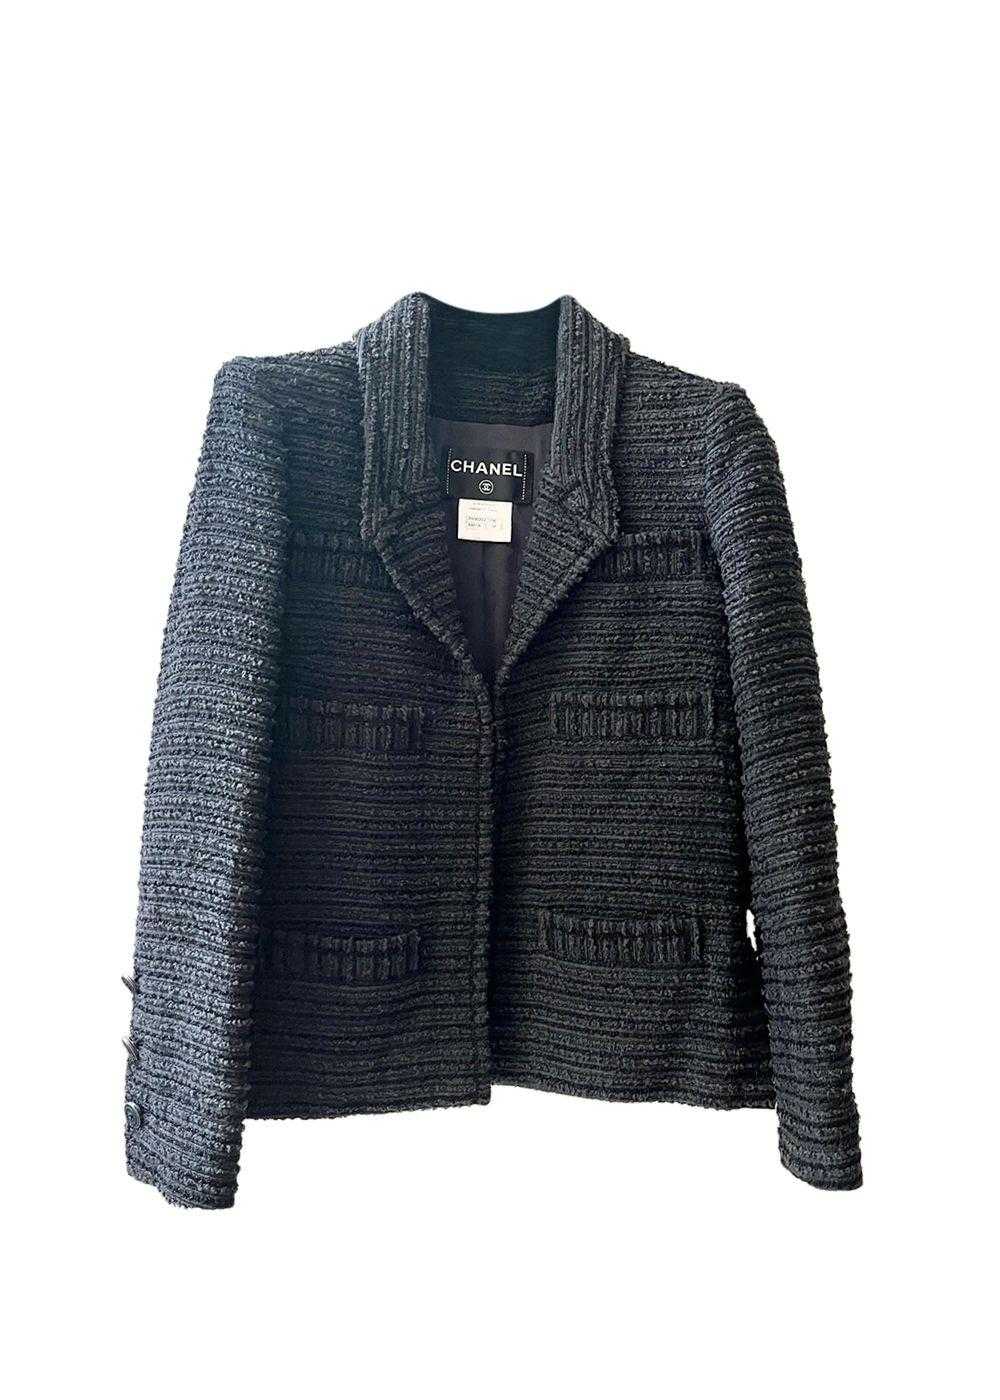 Product Details Chanel Navy Pleated Tweed Jacket - image 1